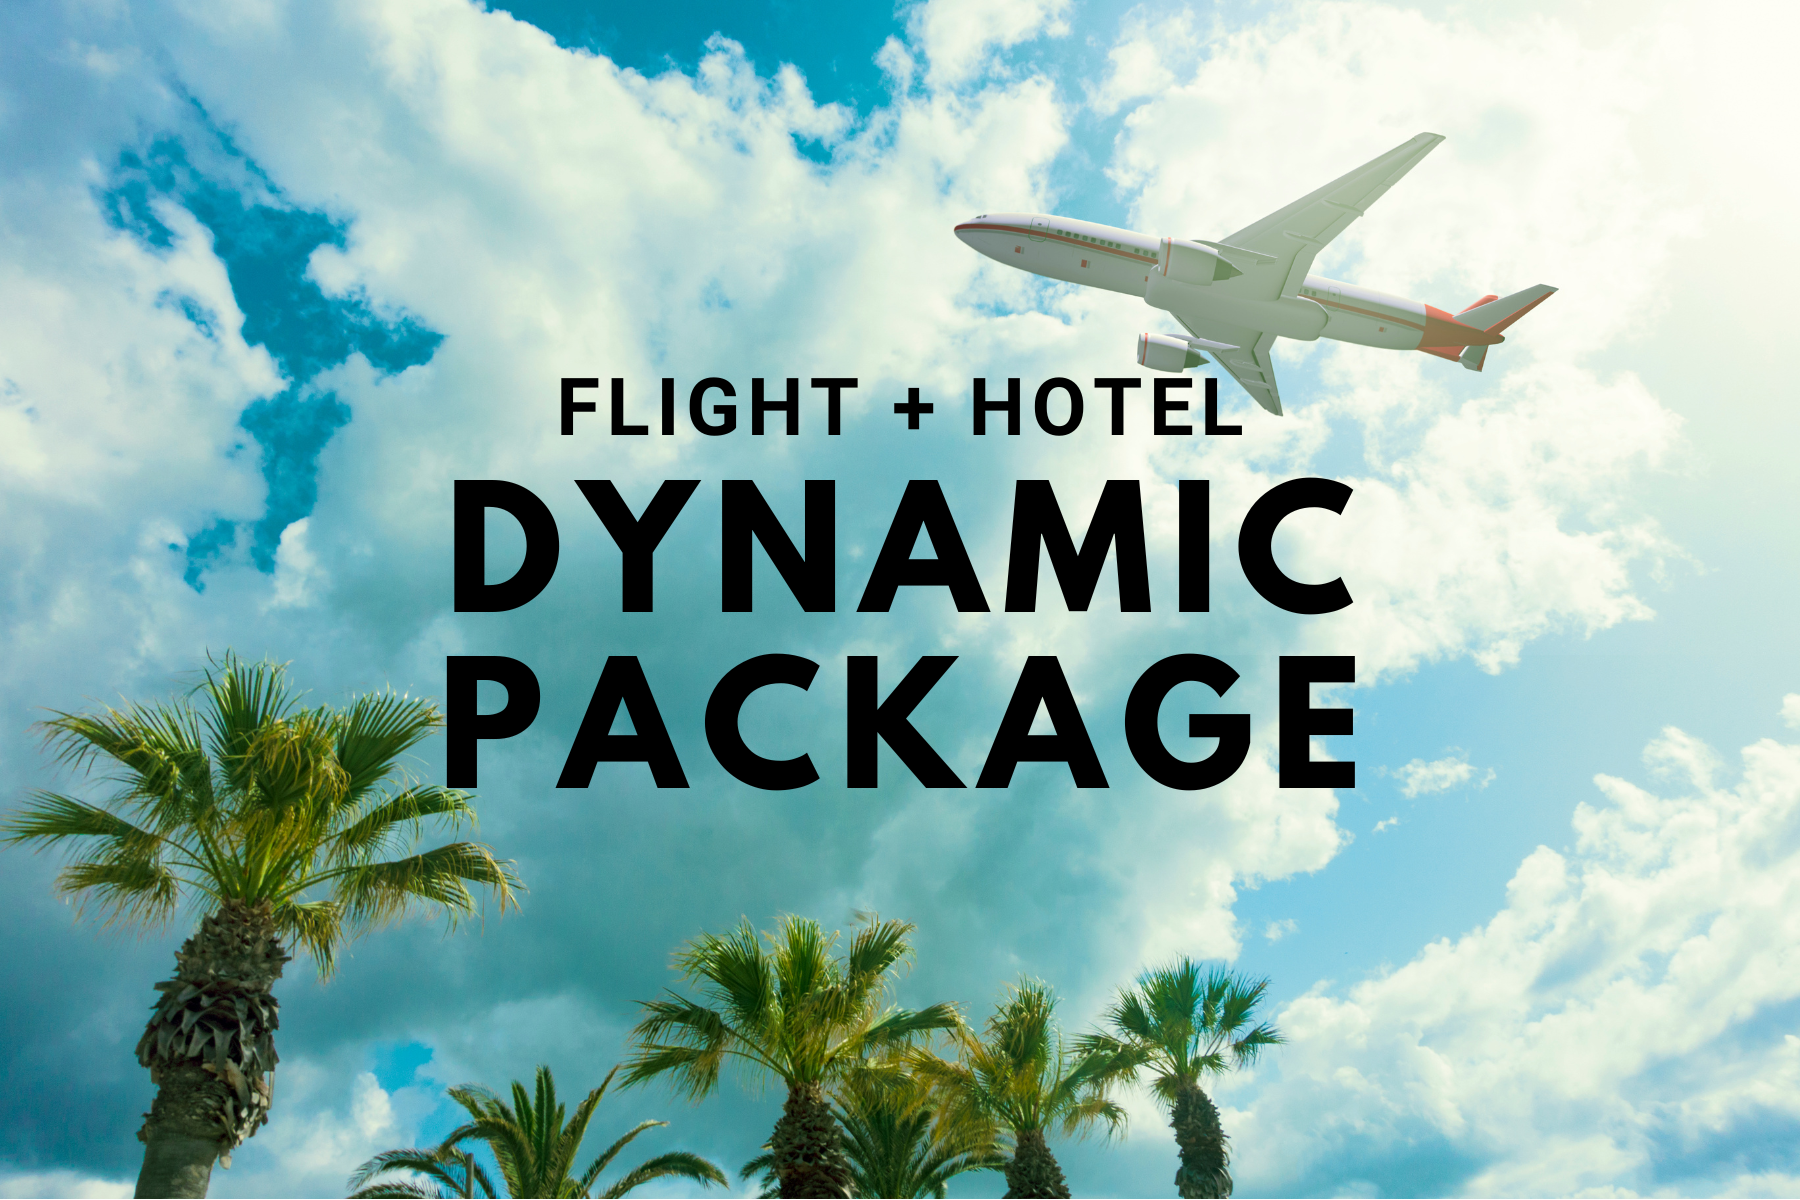 [Flight + Hotel] Dynamic Package reservations available!